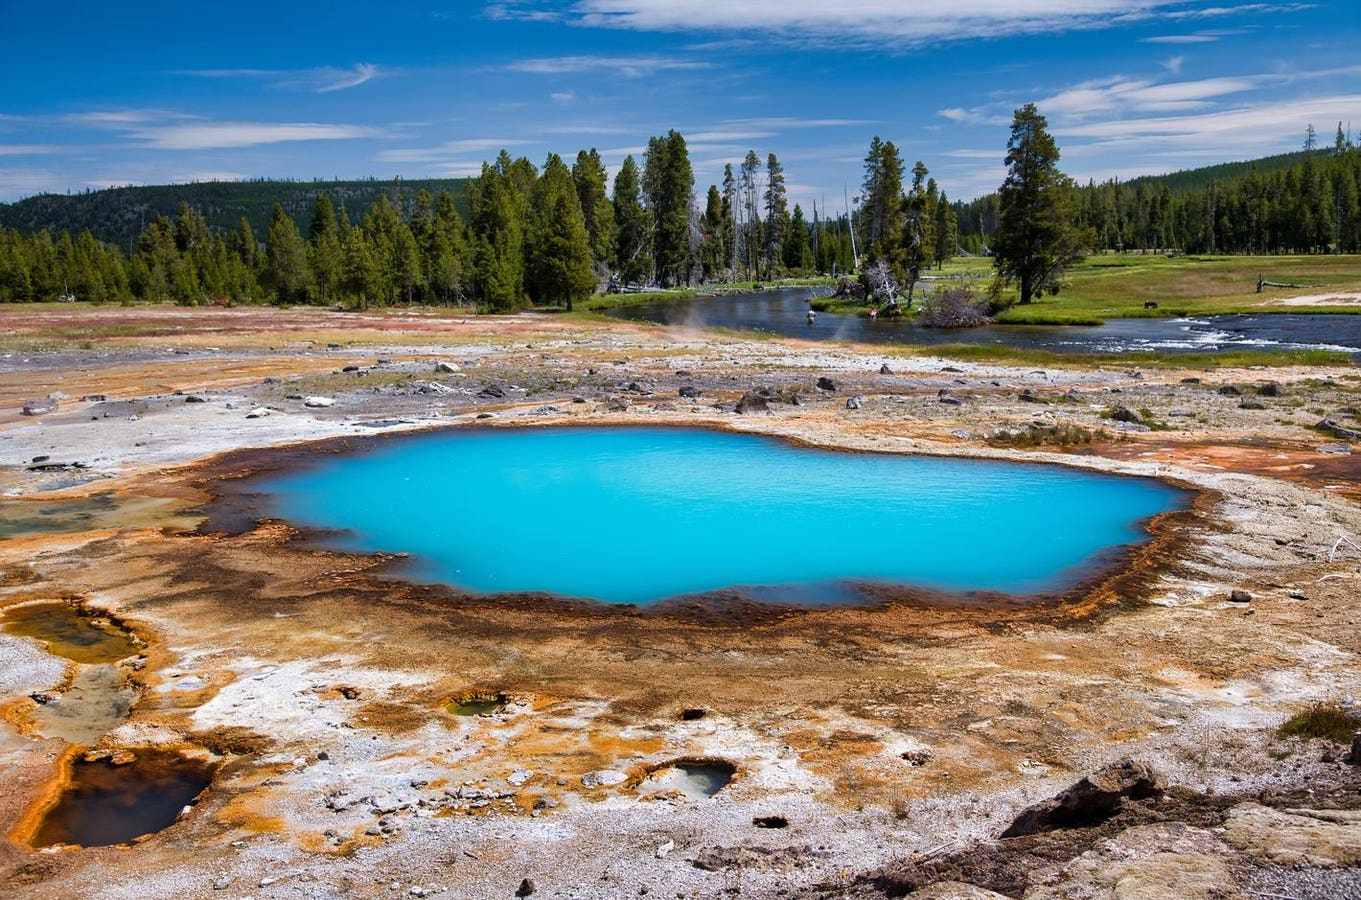 Don’t Panic: The Yellowstone Explosion Isn’t Tied To Its Supervolcano